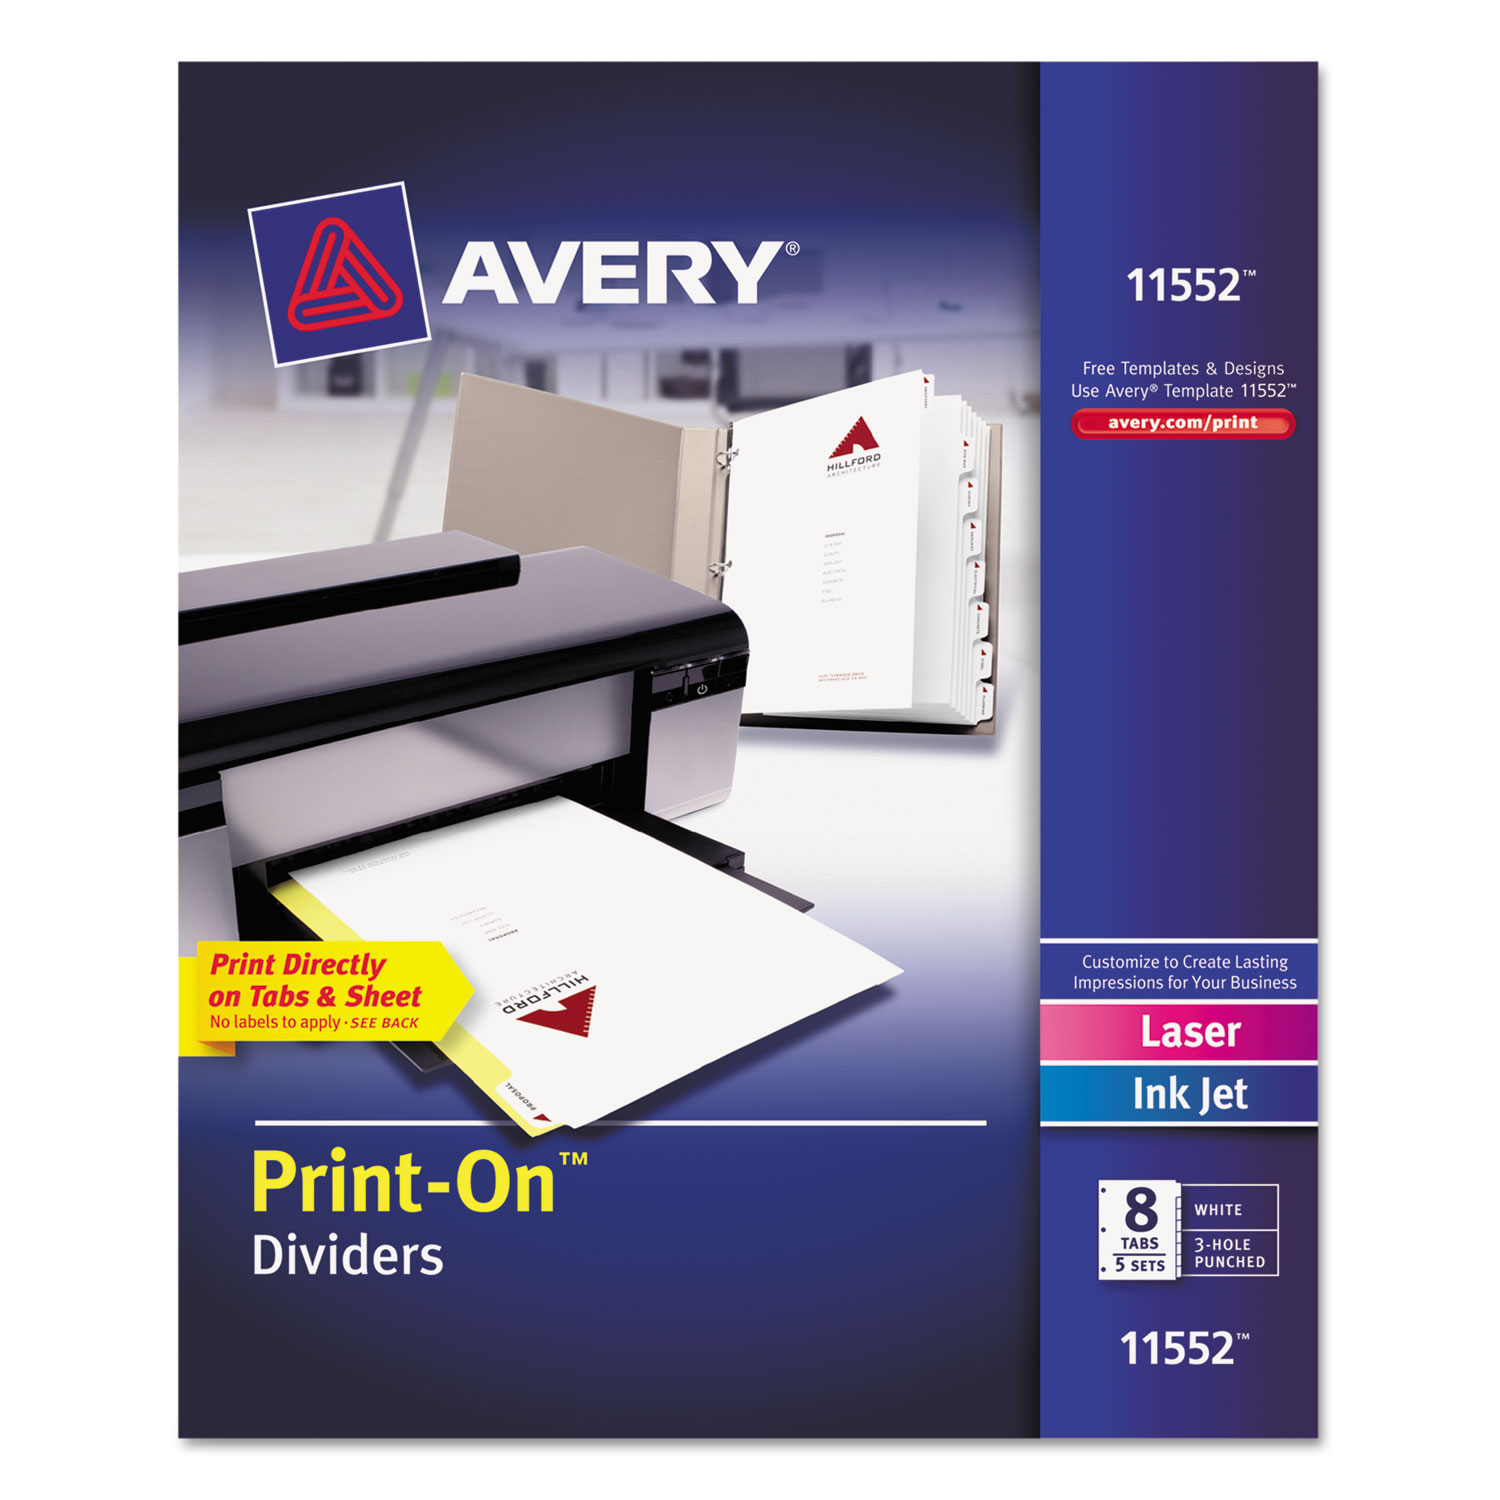  Avery 11552 Customizable Print-On Dividers, 8-Tab, Letter, 5 Sets (AVE11552) 